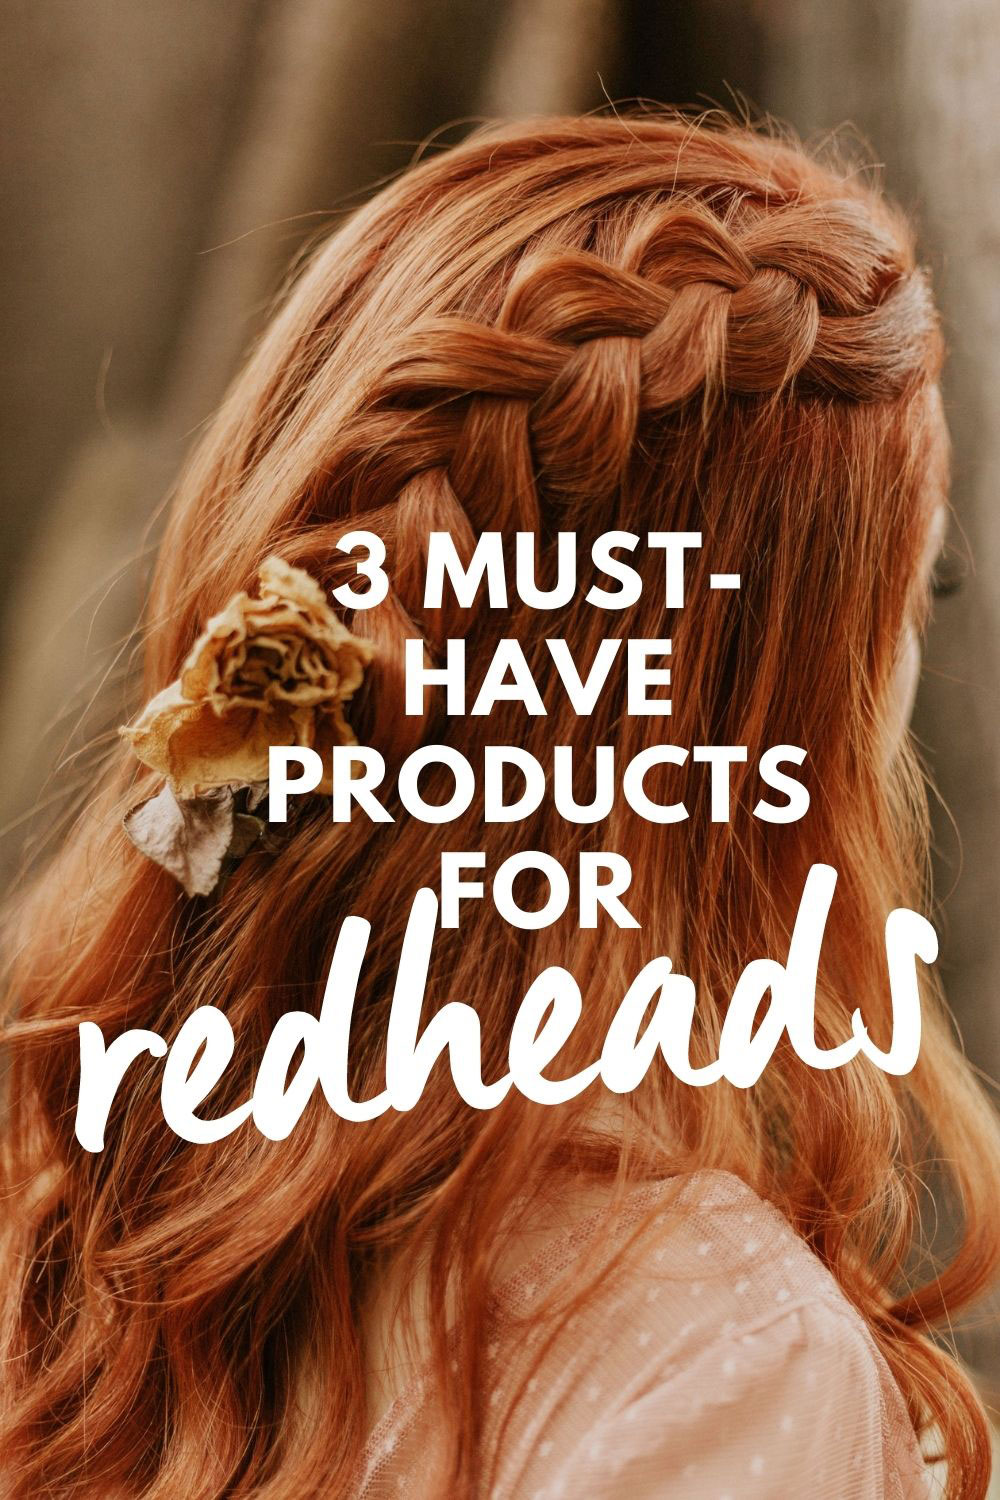 3 must-have products for redheads